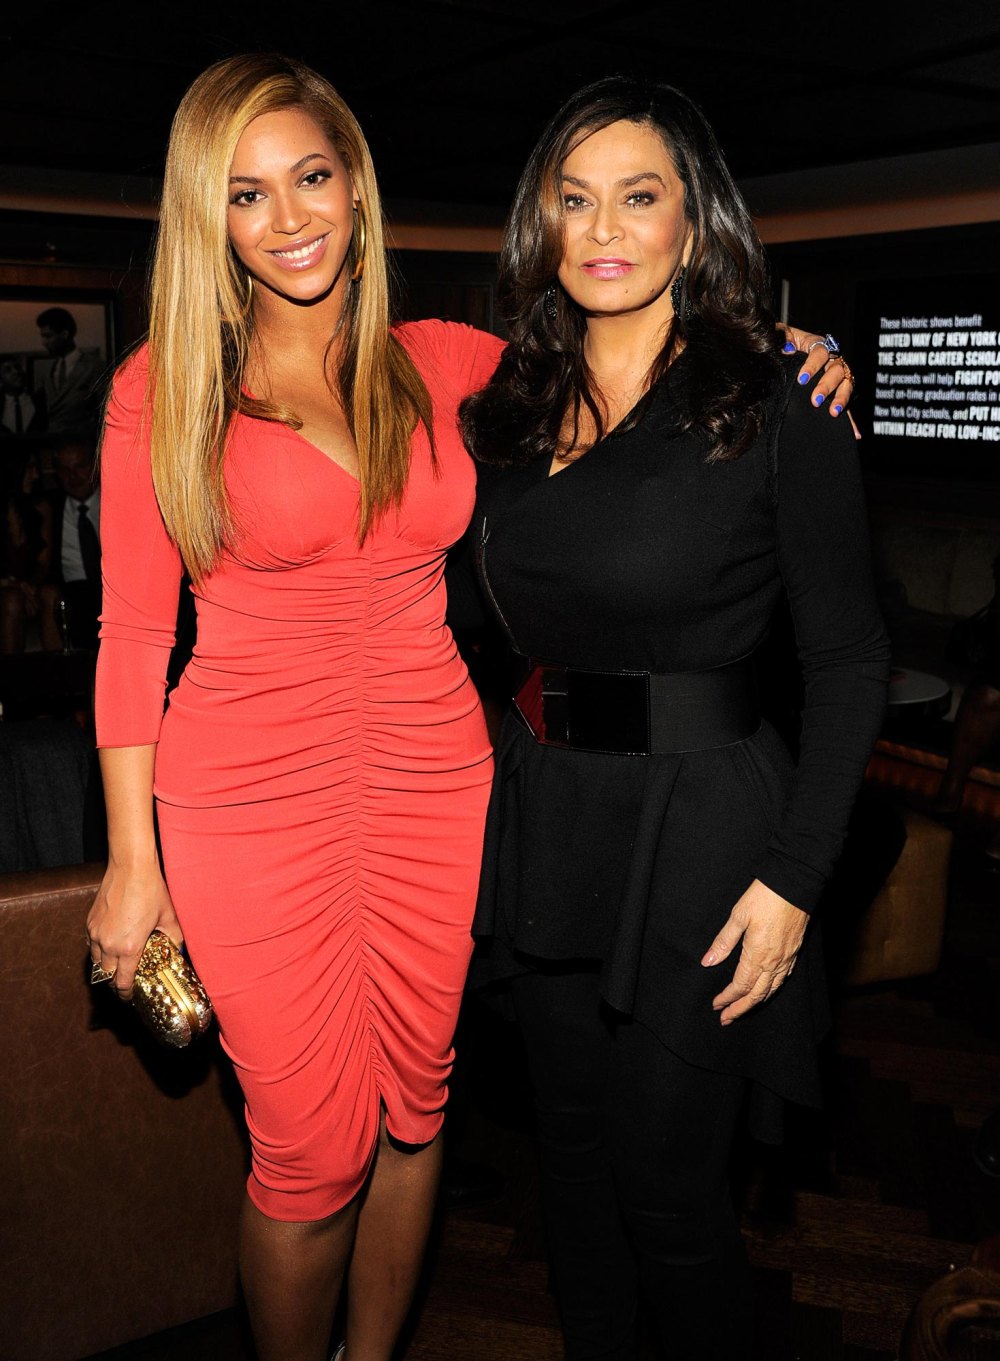 Beyonce s Mom Tina Knowles Slams Claims That Her Daughter Lightened Skin for Renaissance Premiere 655